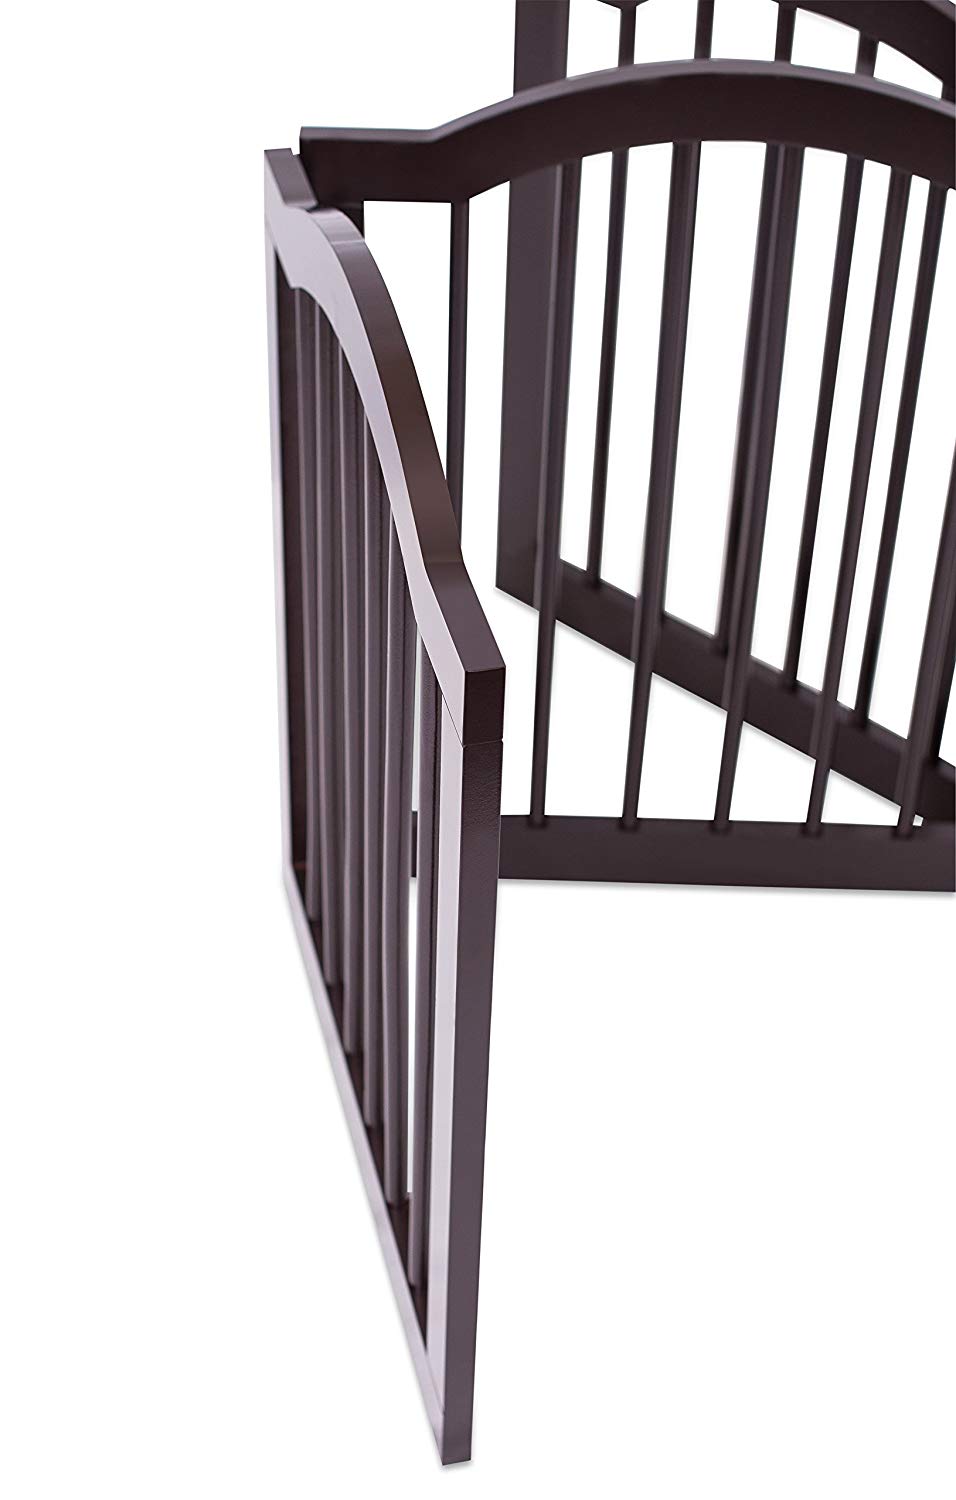 Internet's Best Pet Gate with Arched Top - 3 Panel - 24" Tall - Espresso - image 3 of 8